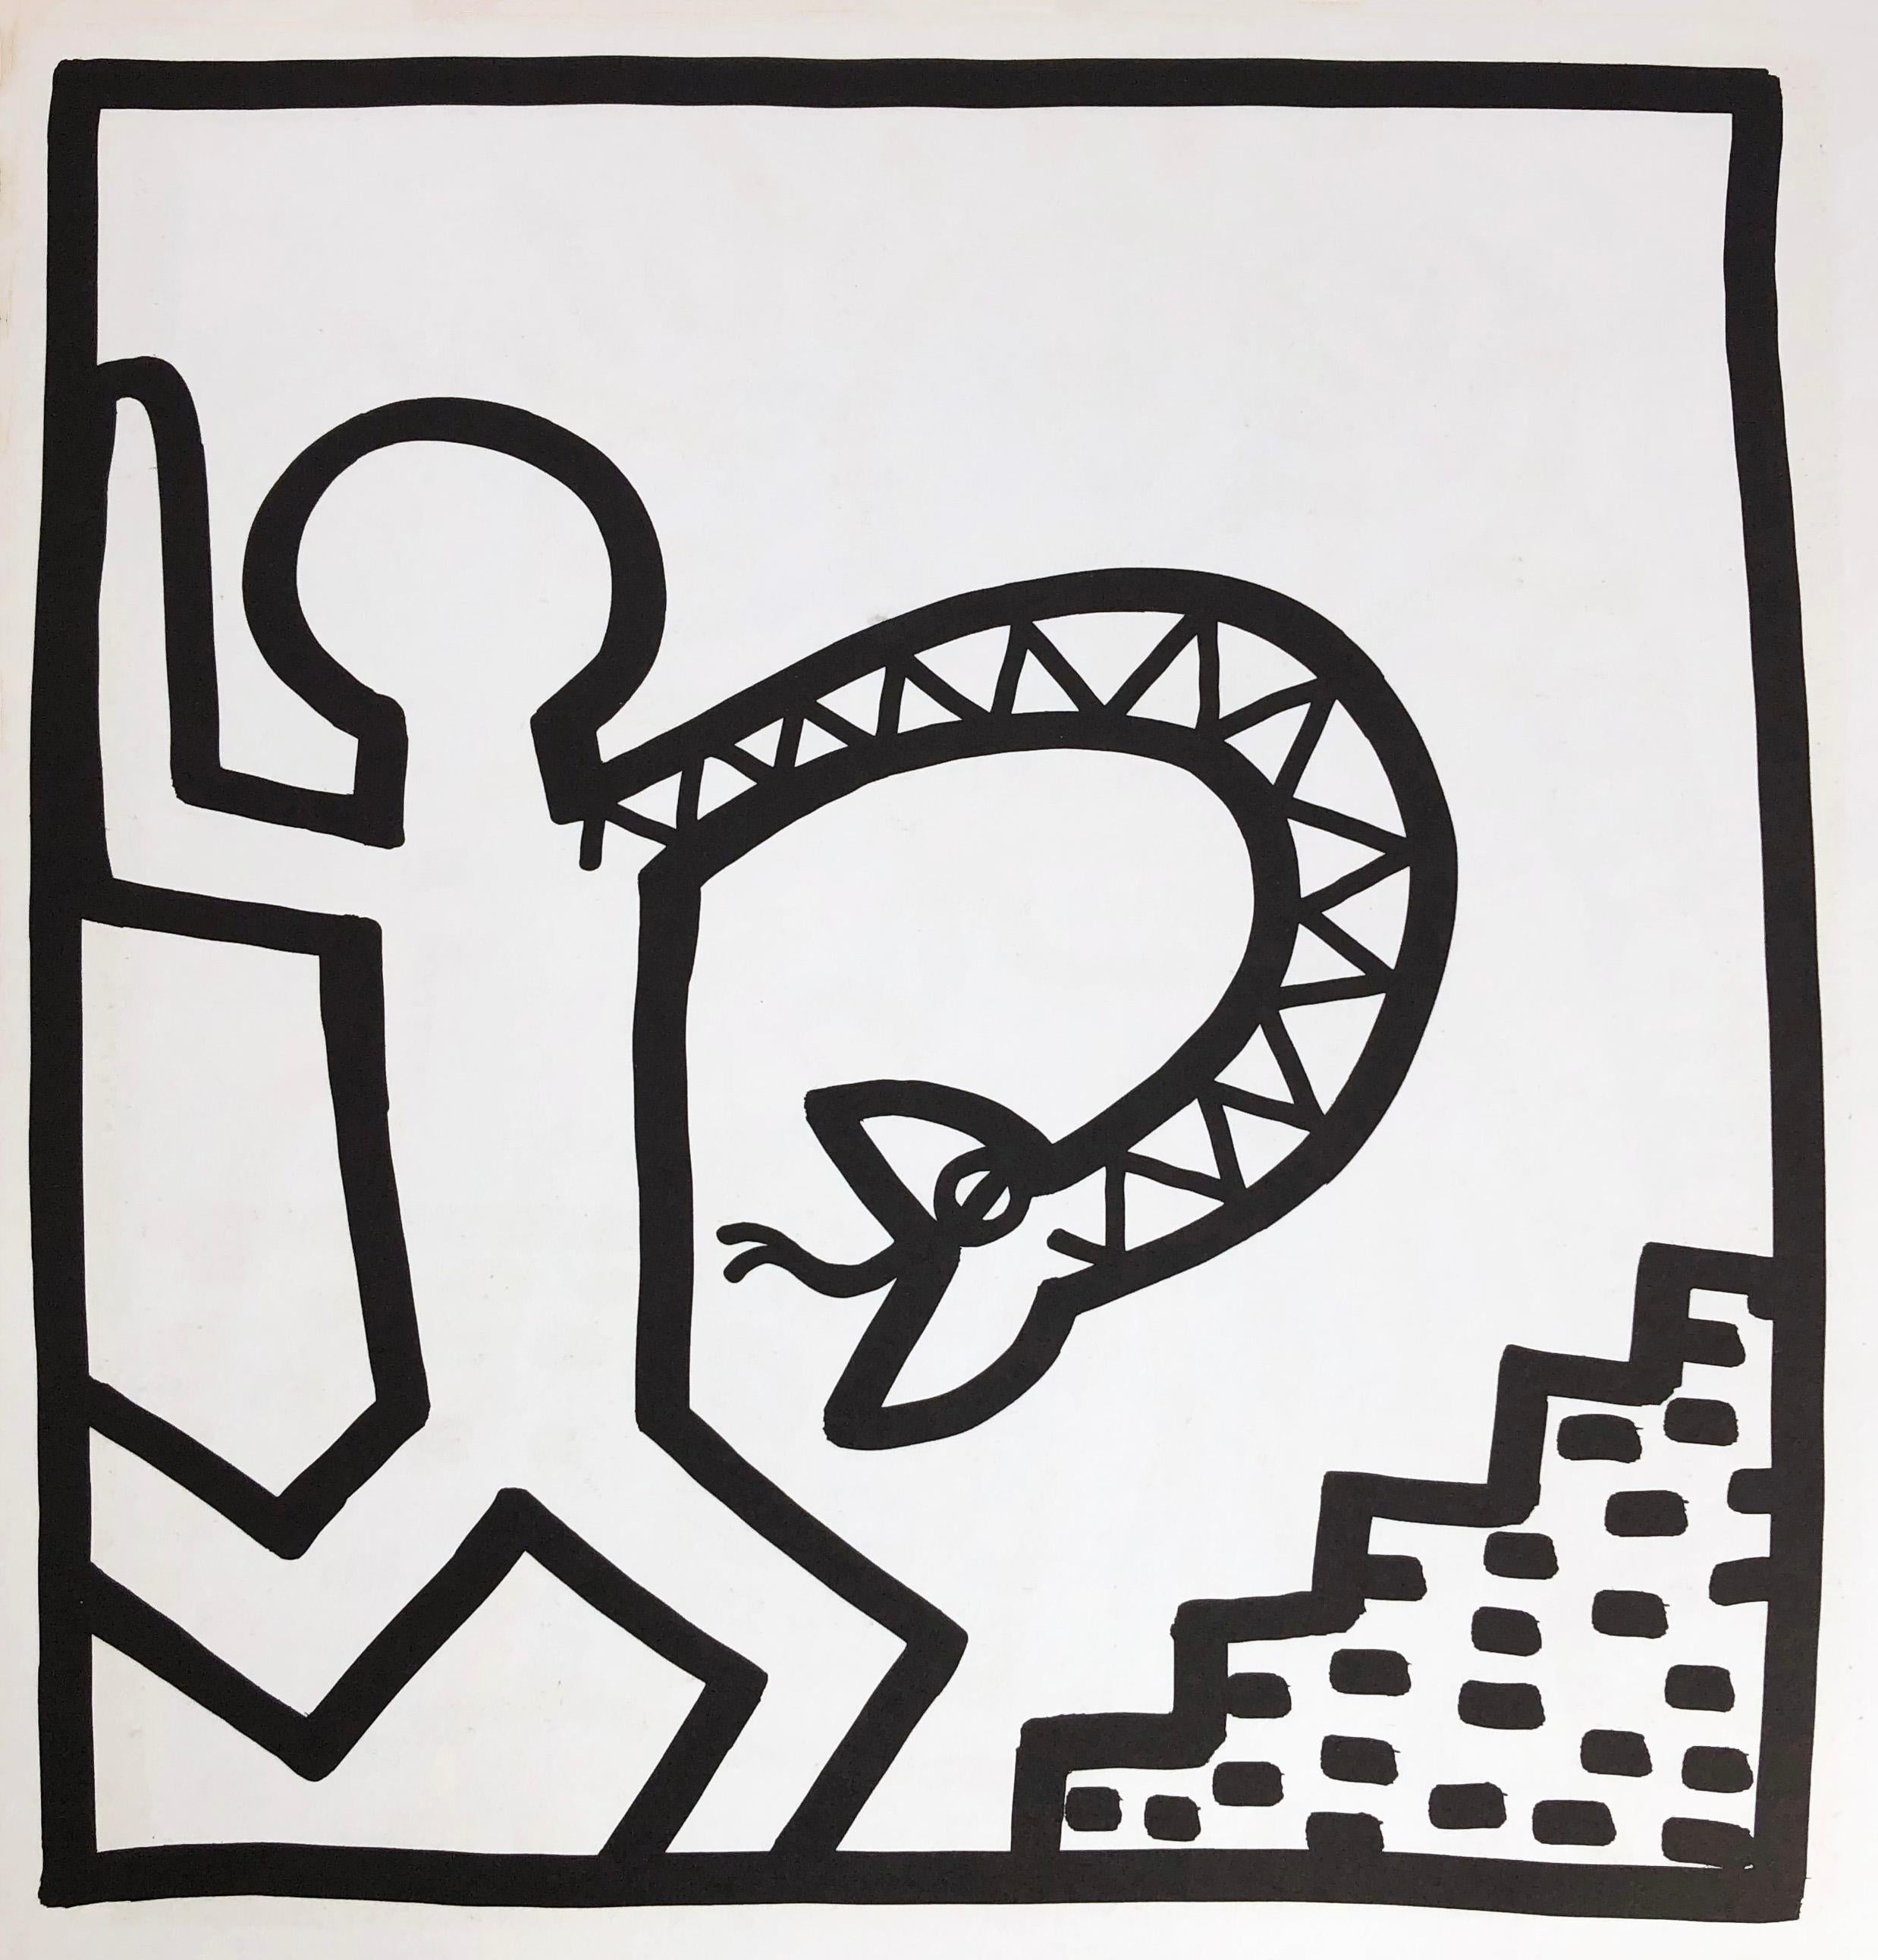 Keith Haring Lithograph 1982
Double-sided offset lithograph published by Tony Shafrazi Gallery, New York, 1982 from an edition of 2000. 

Single sheet lithograph from the seminal spiral bound, early monograph showcasing Haring's work. 9 x 9